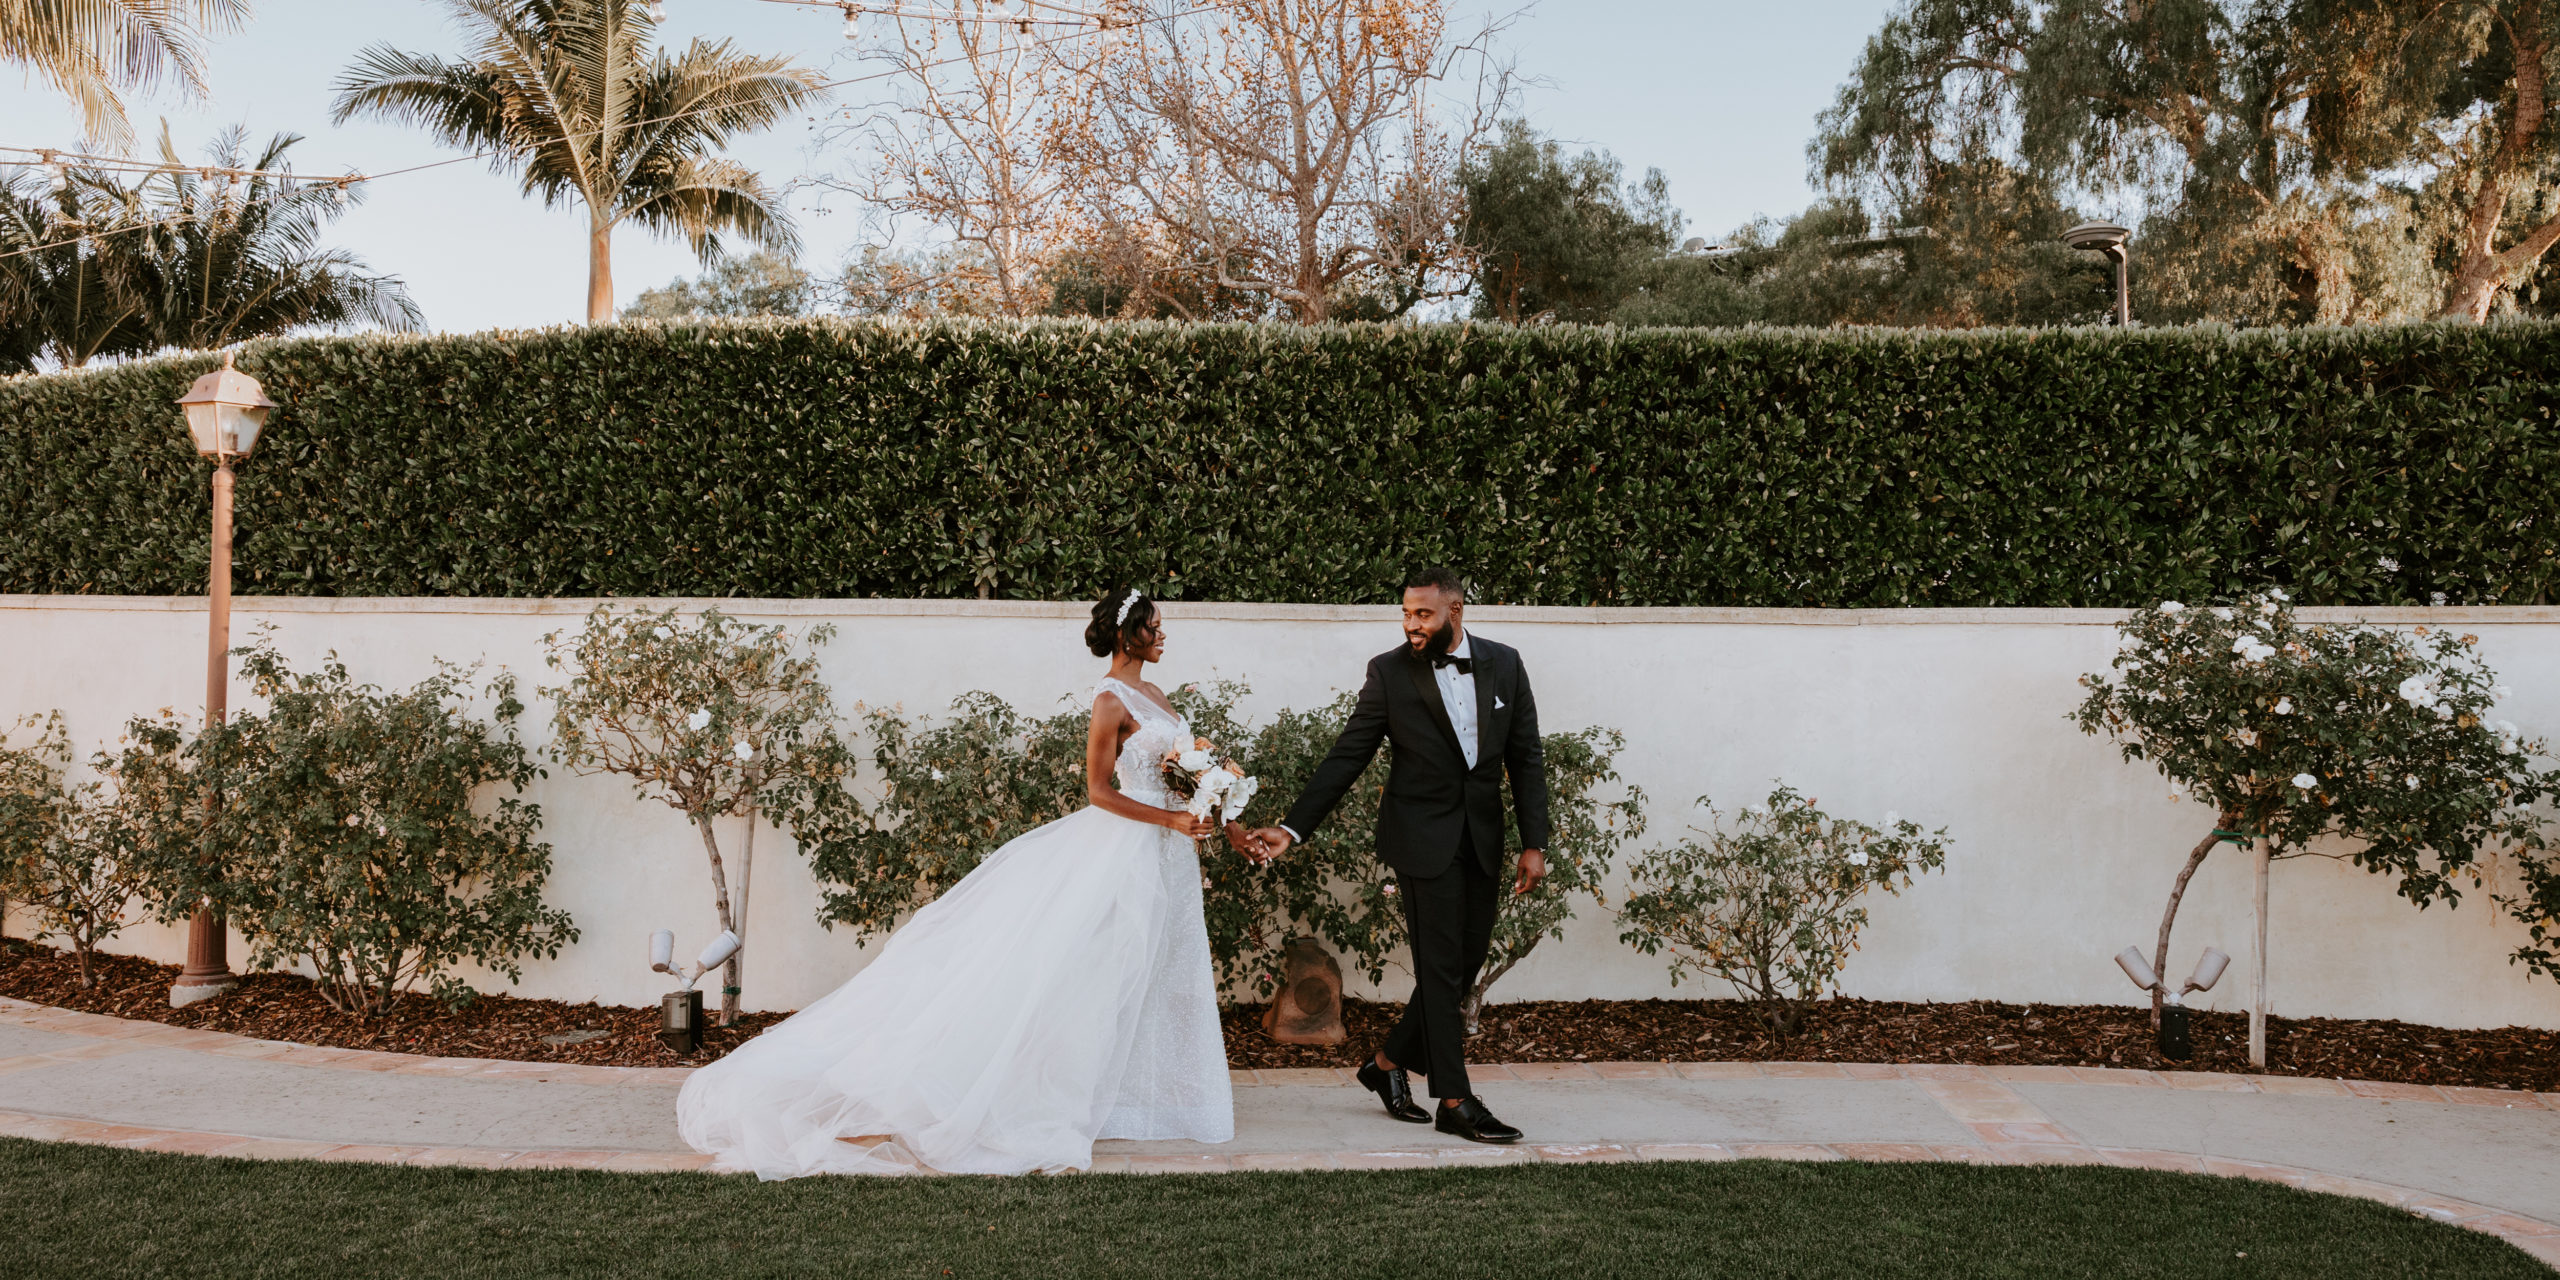 Before choosing your wedding venue check out these tips, by Not Jess A Planner, Los Angeles, CA.